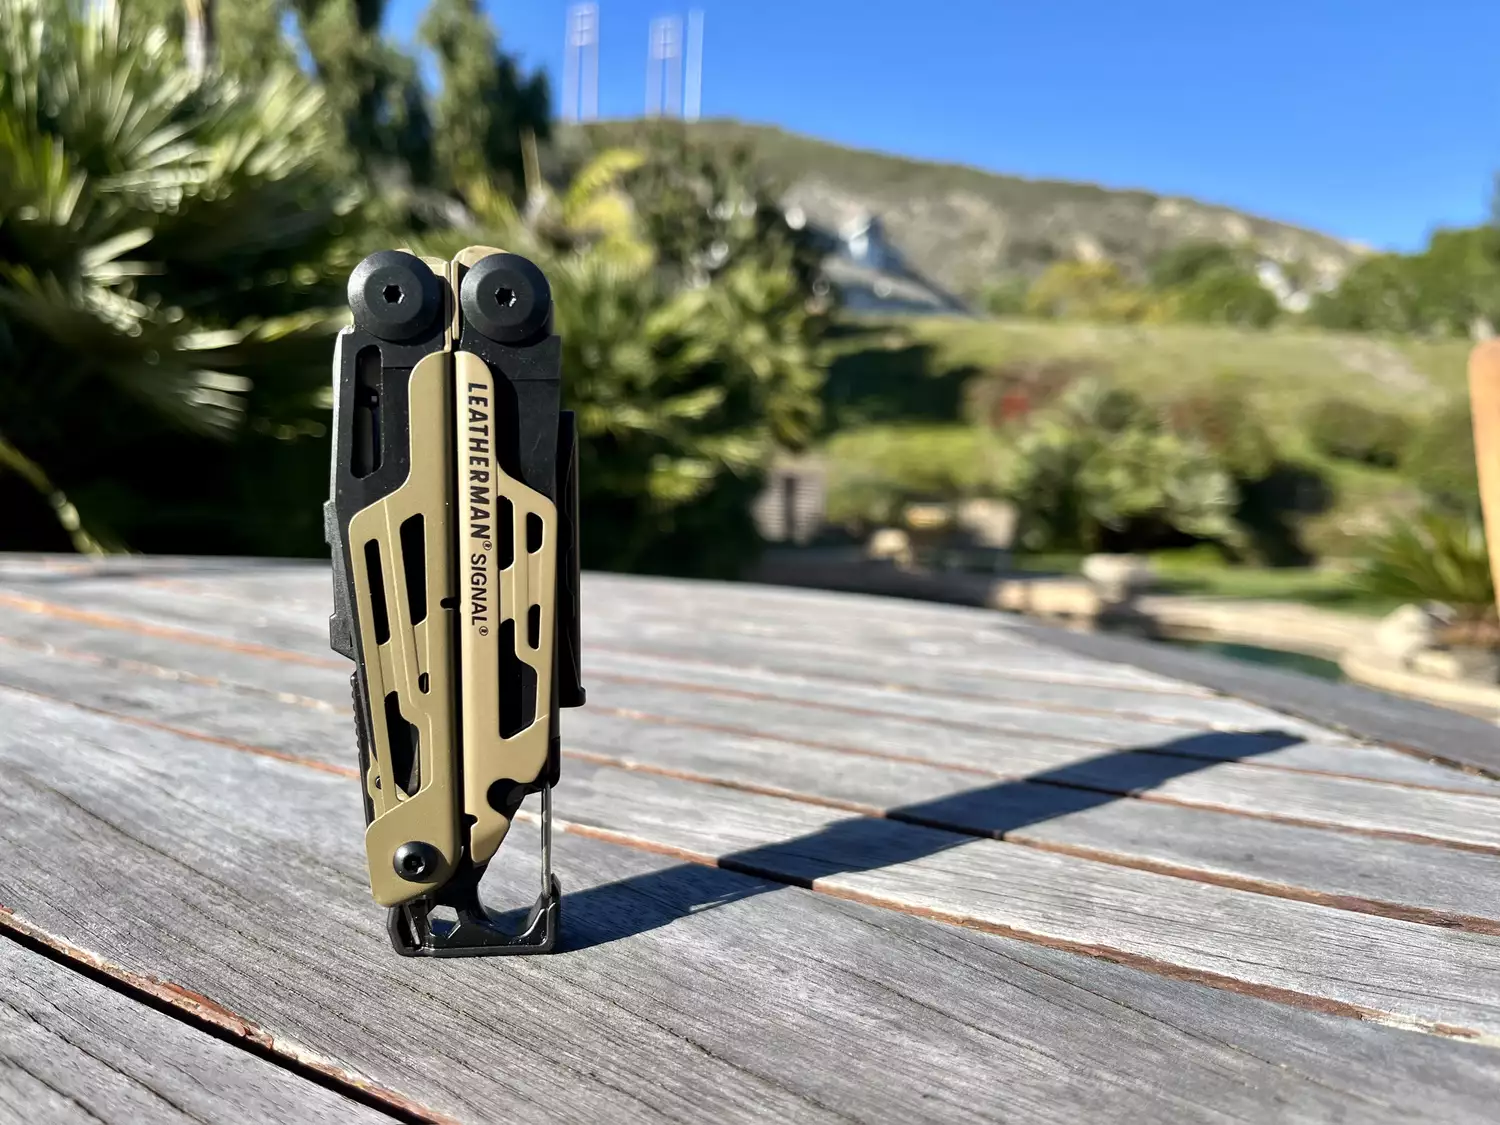 The Leatherman Signal Review